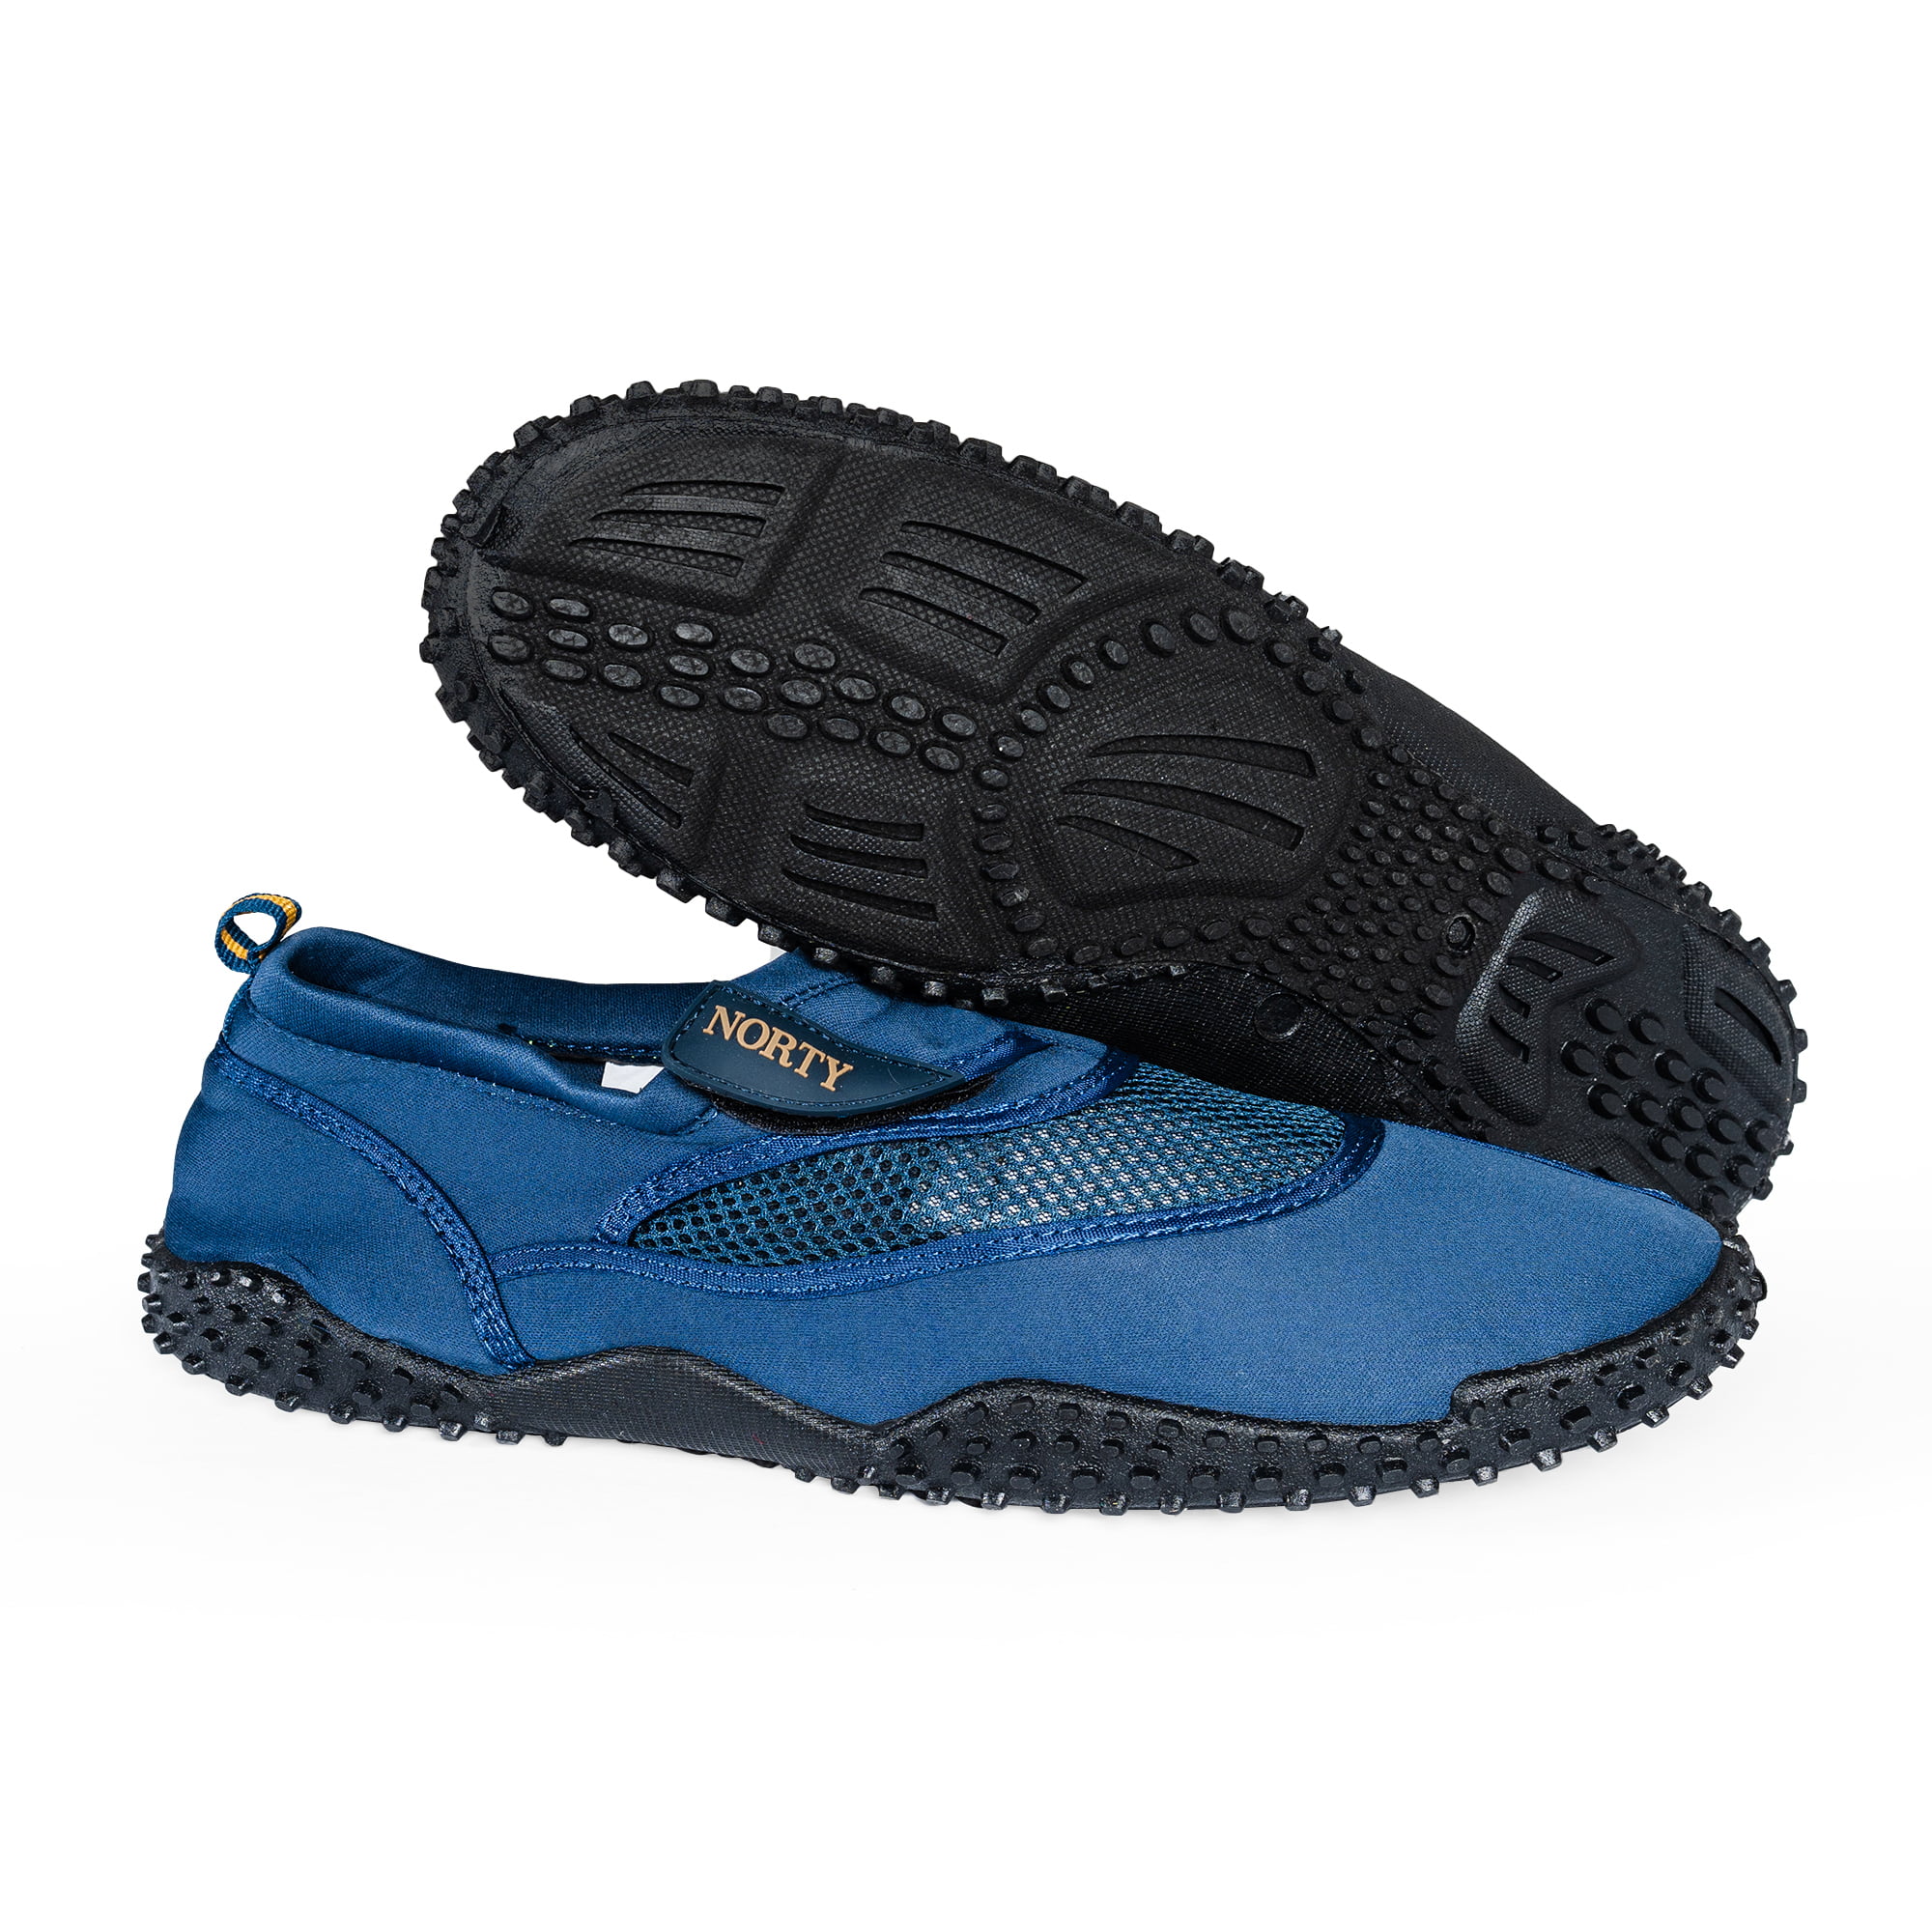 Norty Men's Water Shoes for the beach - Big Sizes 13-15